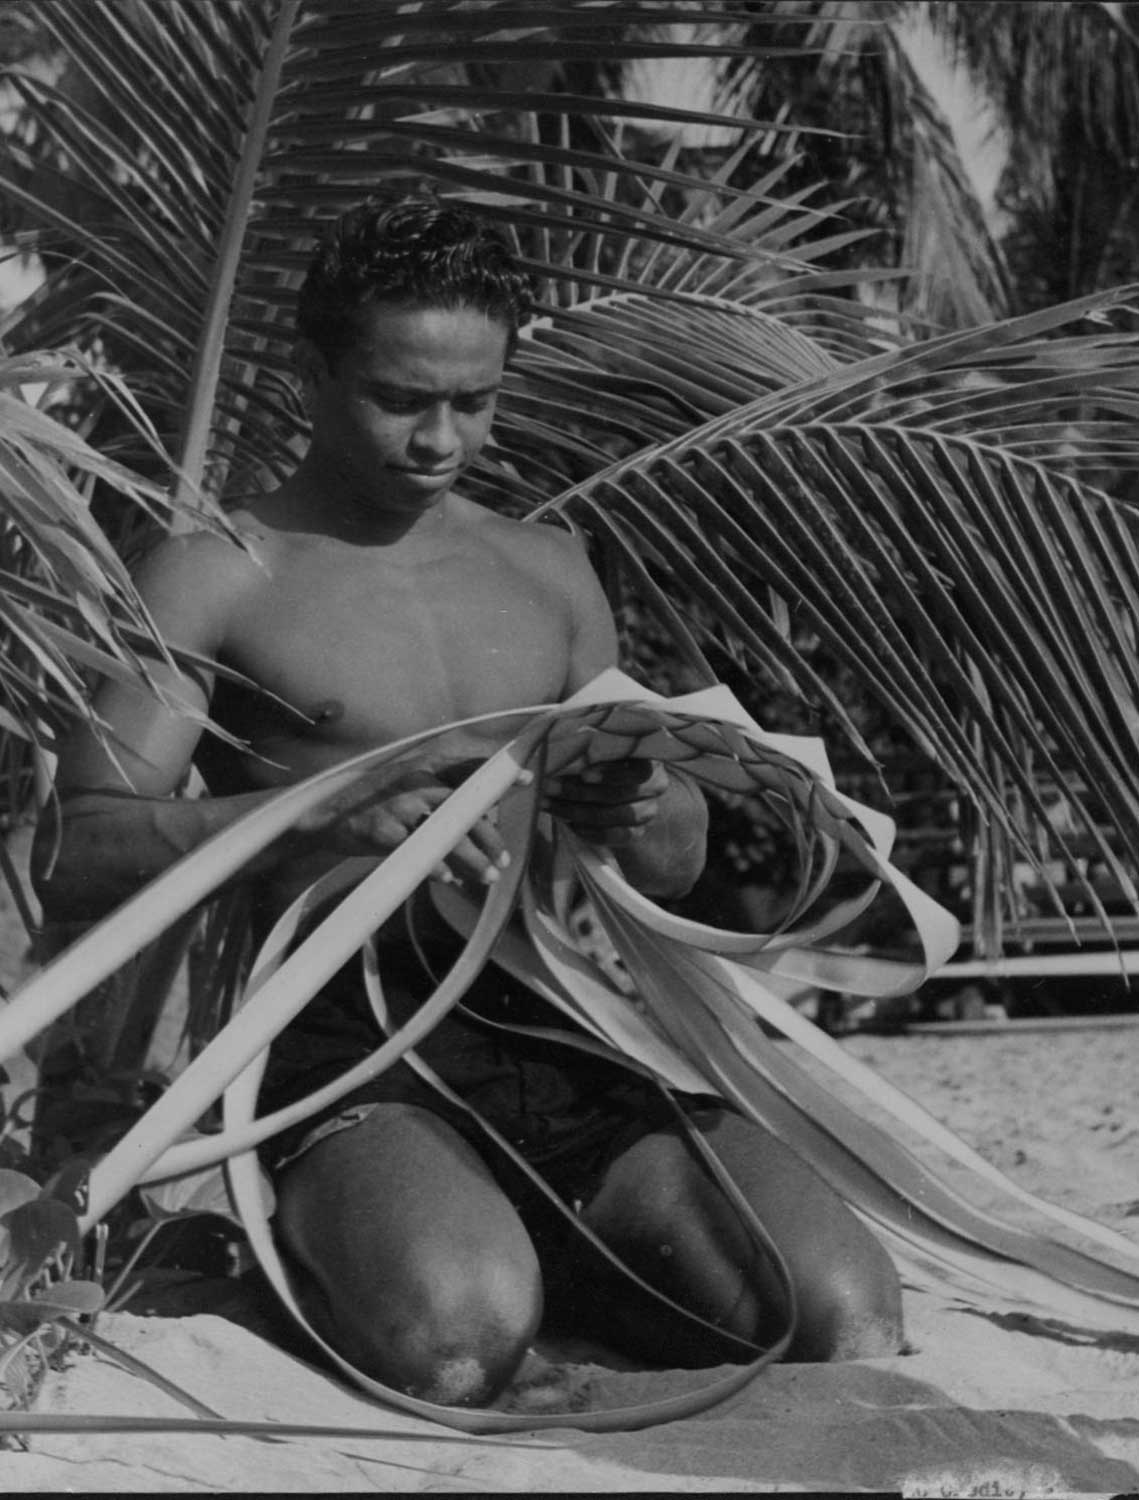 Black and white developed image of man weaving with coconut leaves.